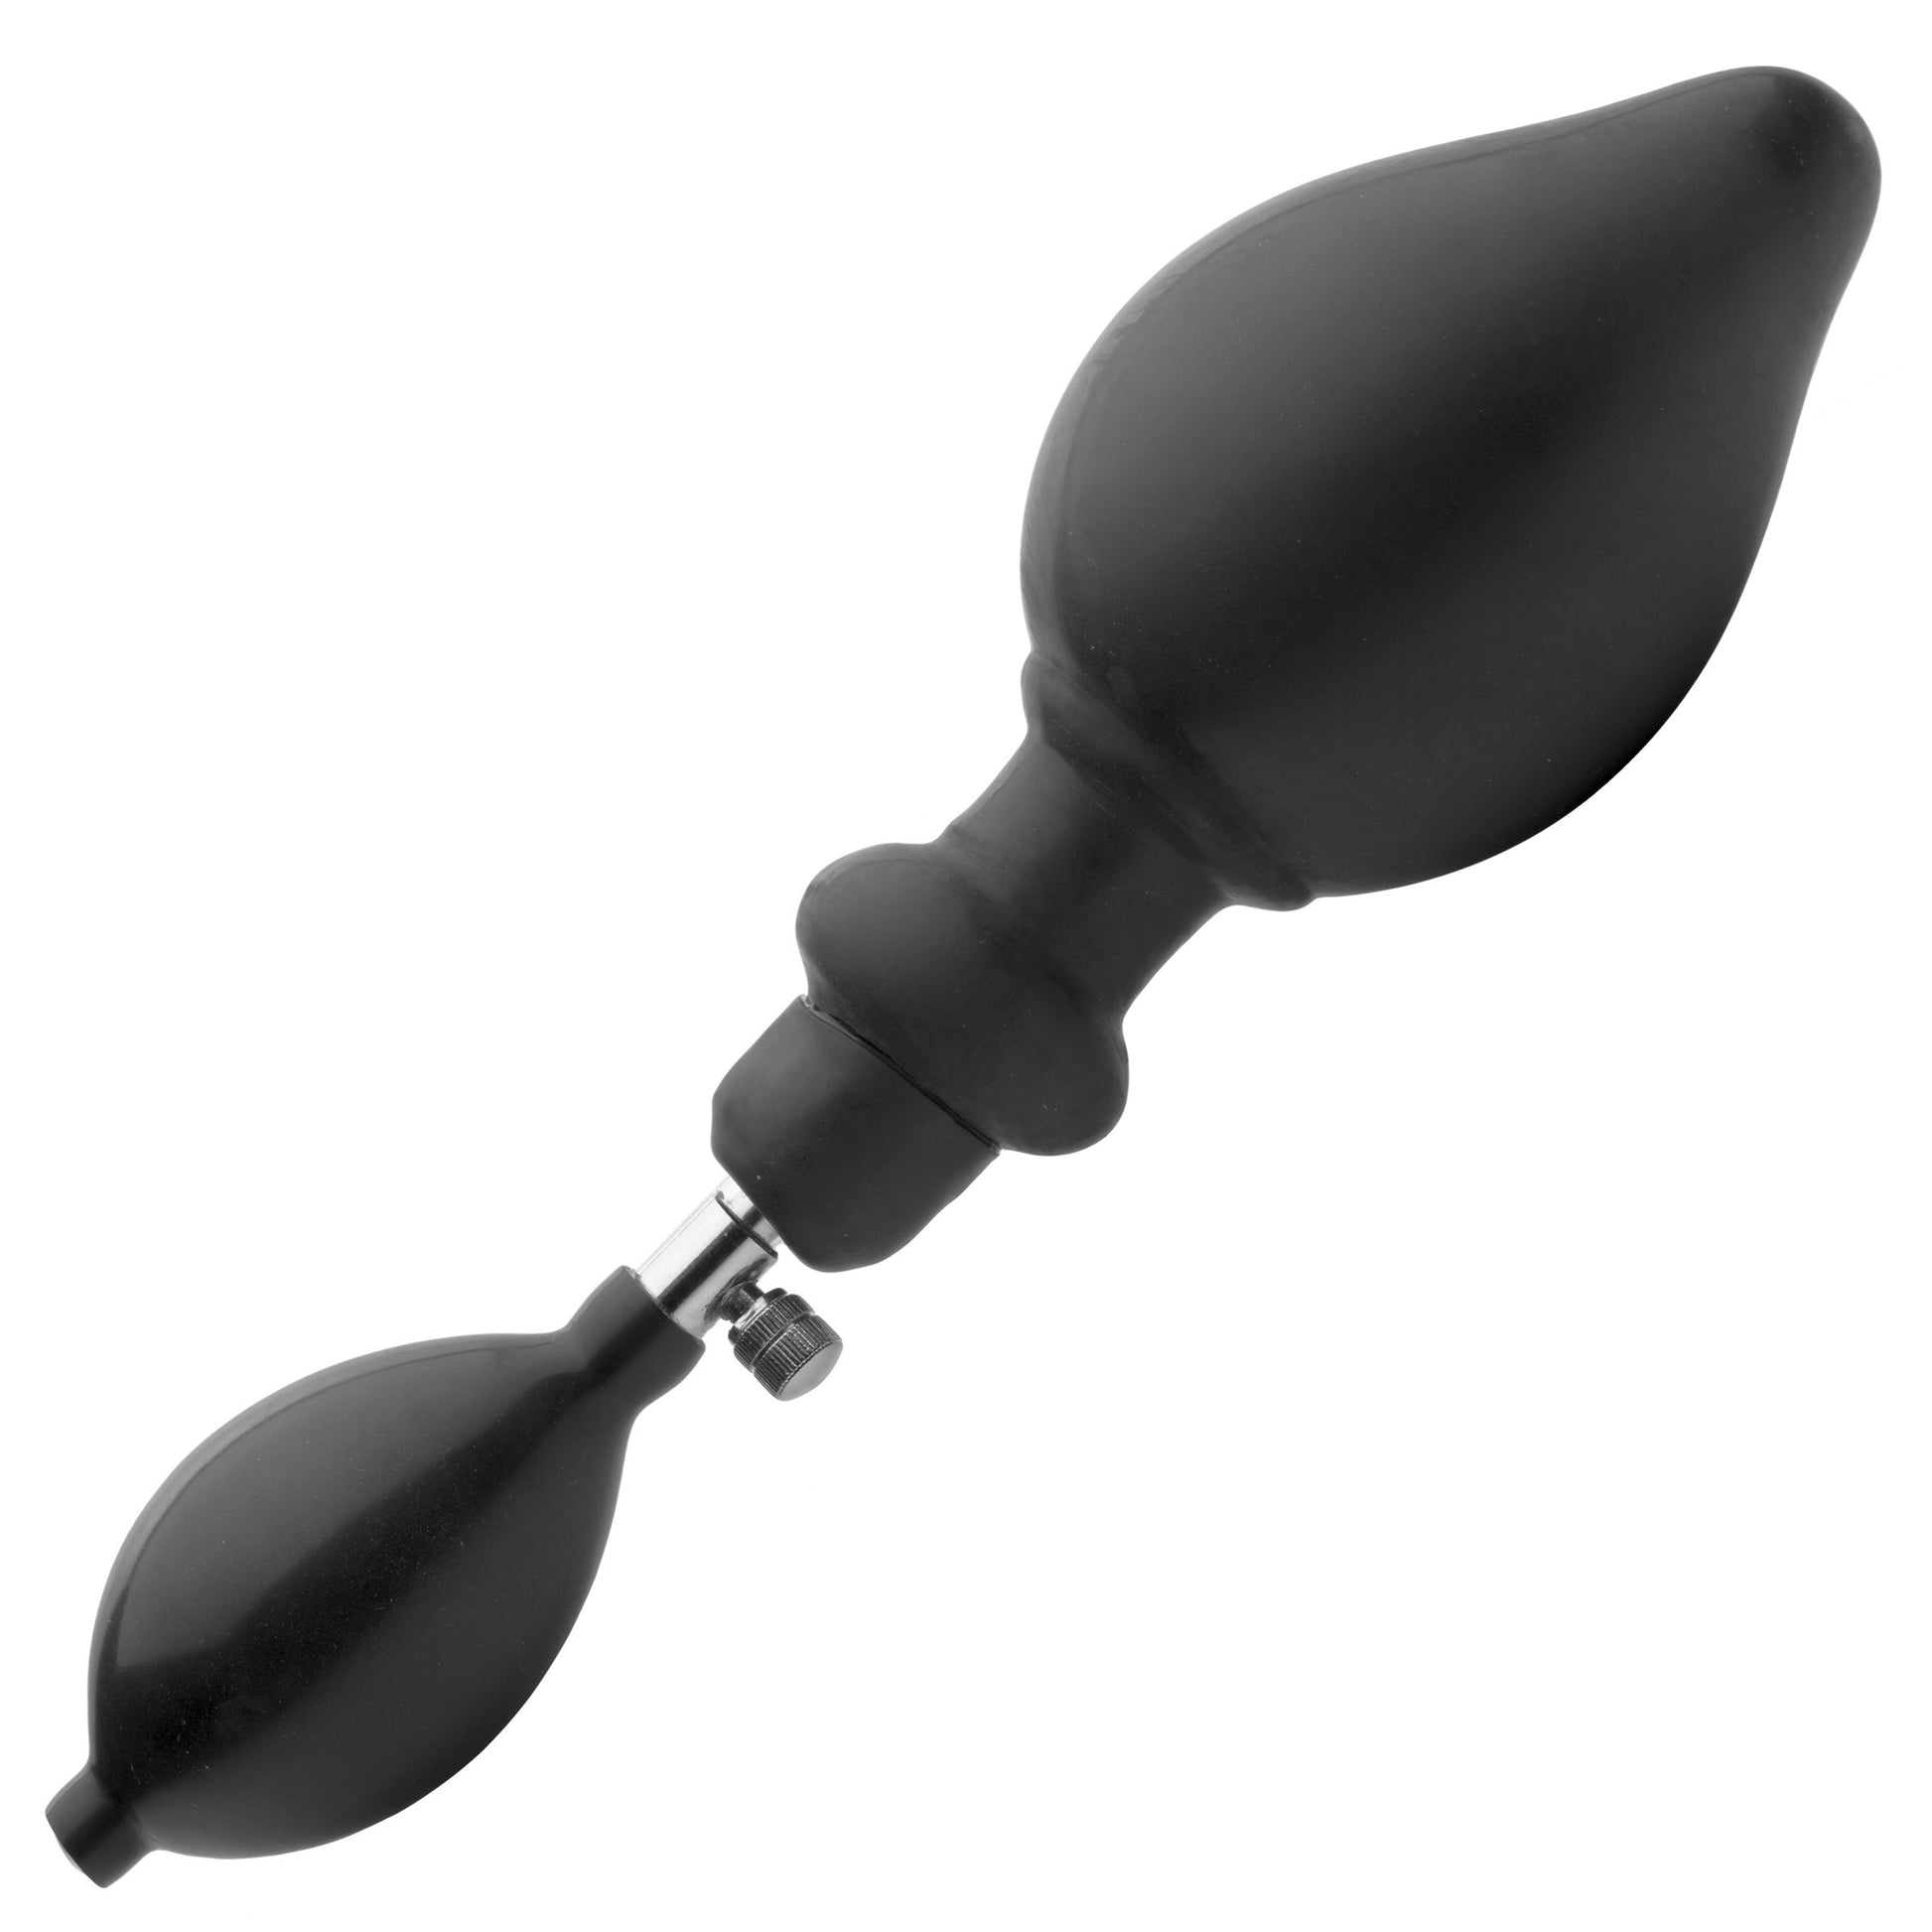 Expander Inflatable Anal Plug with Removable Pump - UABDSM